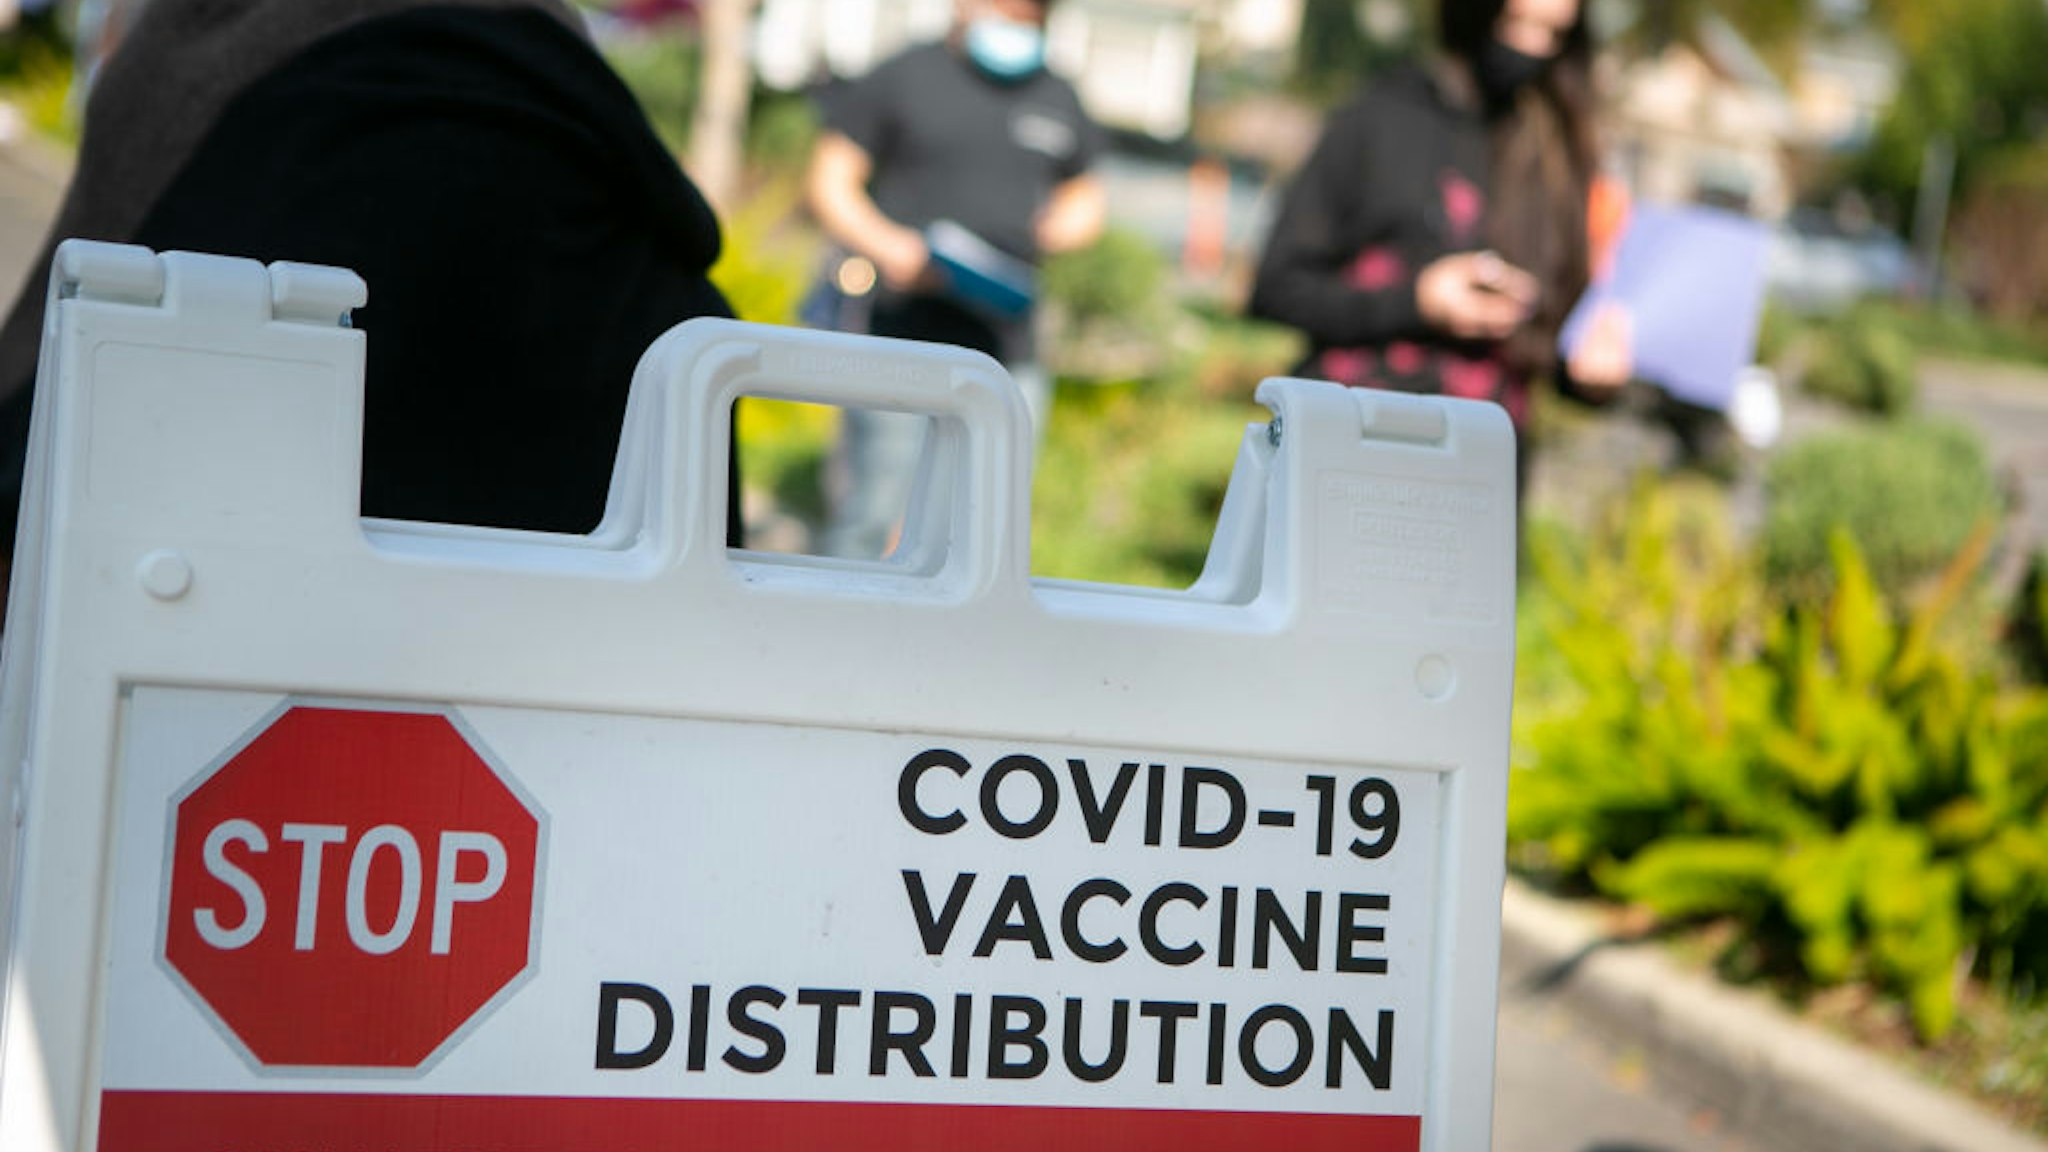 Hundreds of people line up for their turn at receiving the COVID-19 vaccine at Kedren Health on Thursday, Feb. 11, 2021 in Los Angeles, CA.